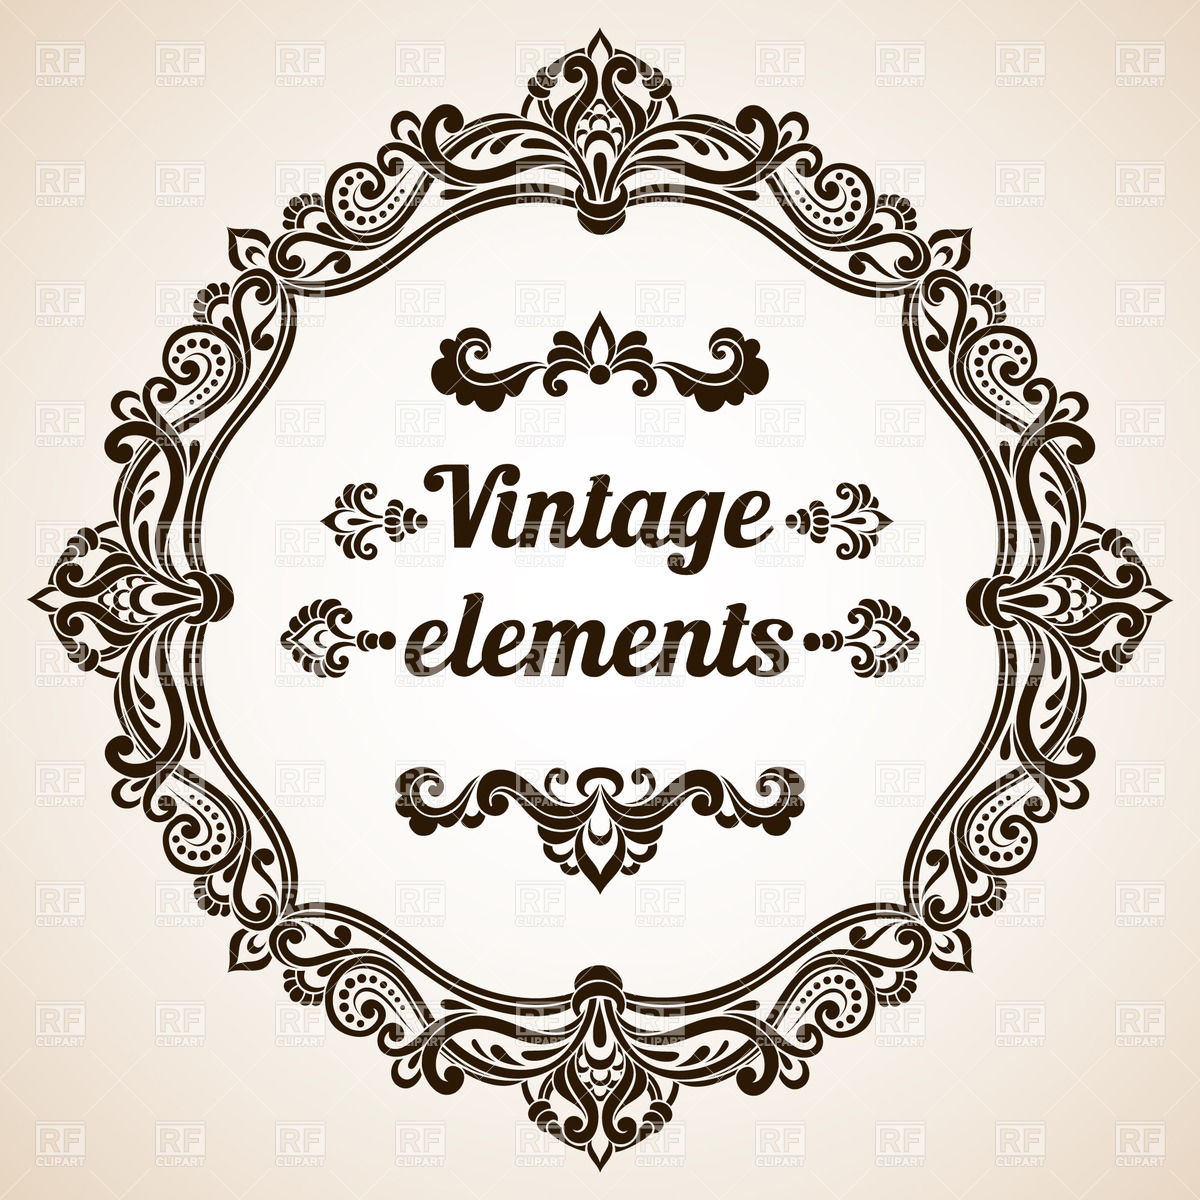 Round Vintage Frame With Ornate Border 28761 Download Royalty Free    